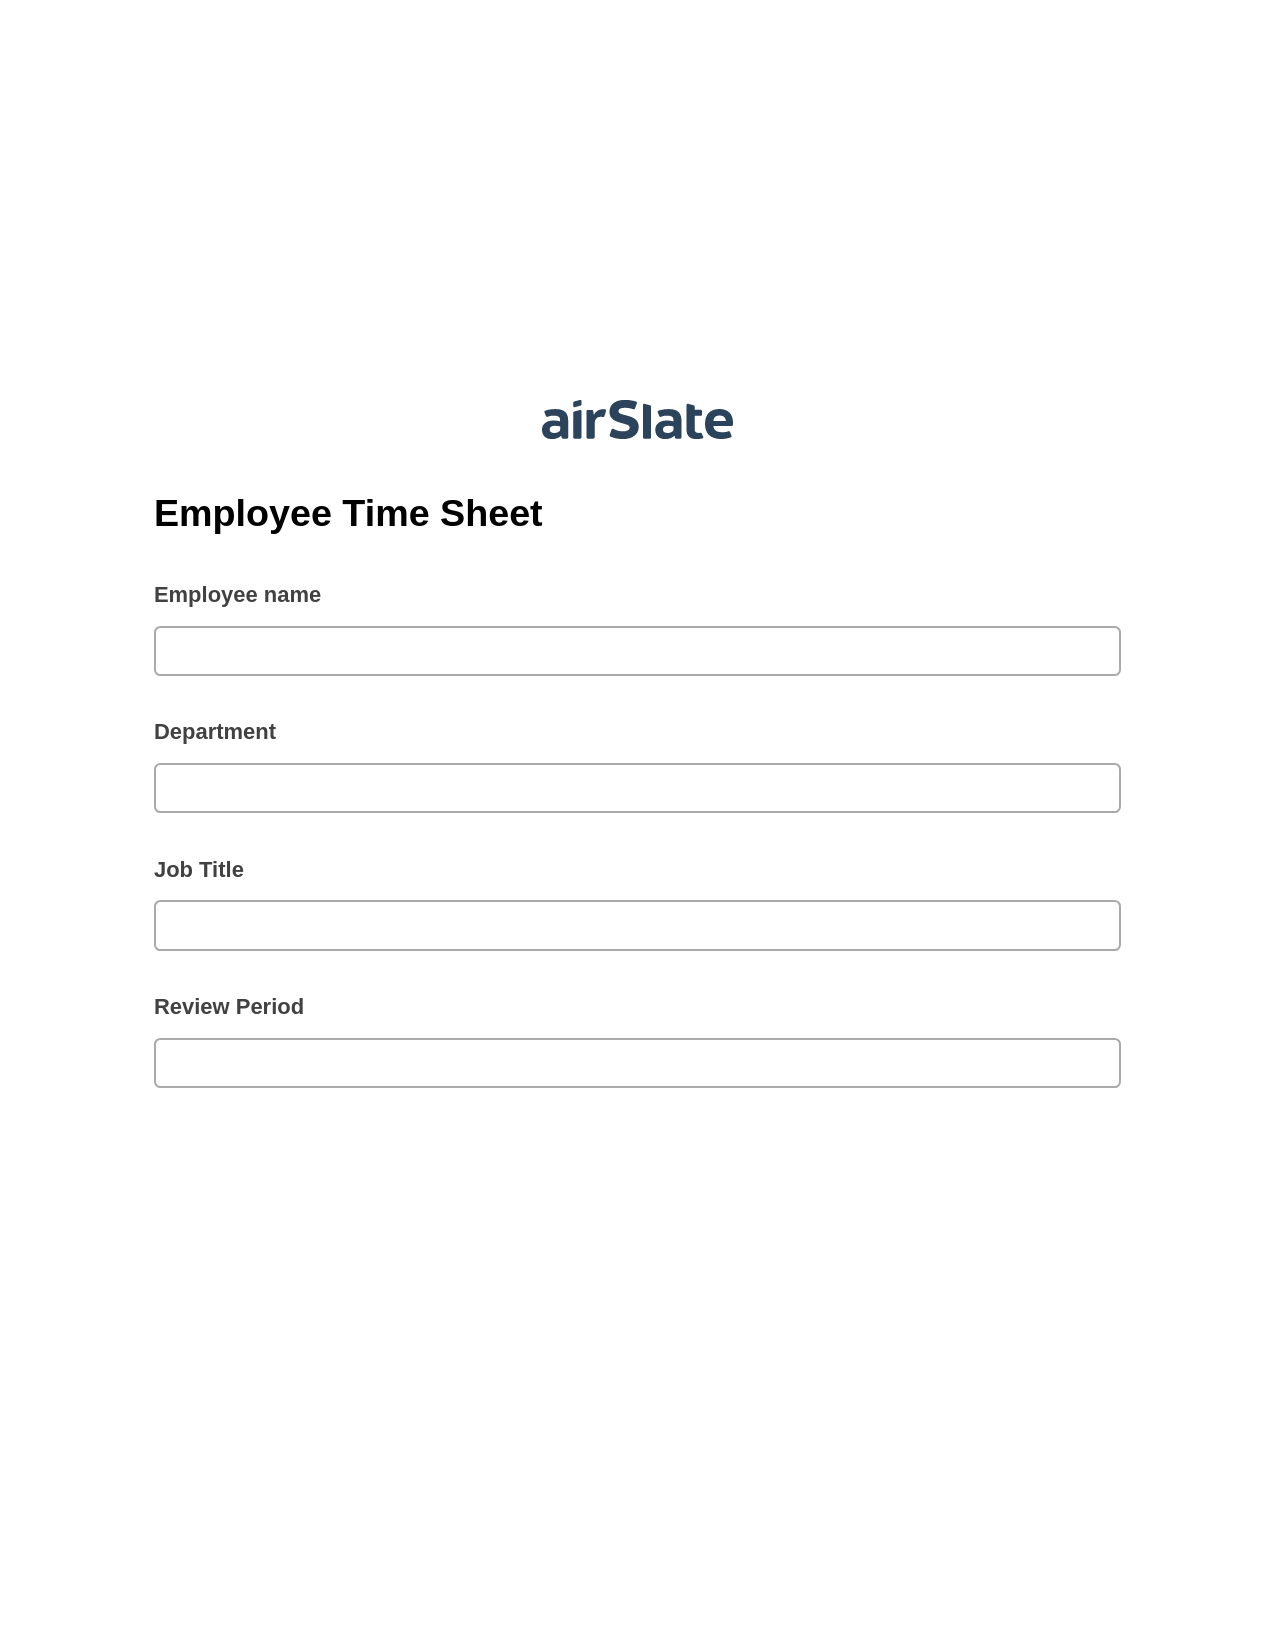 Employee Time Sheet Prefill from NetSuite records, Update Audit Trail Bot, Export to Google Sheet Bot